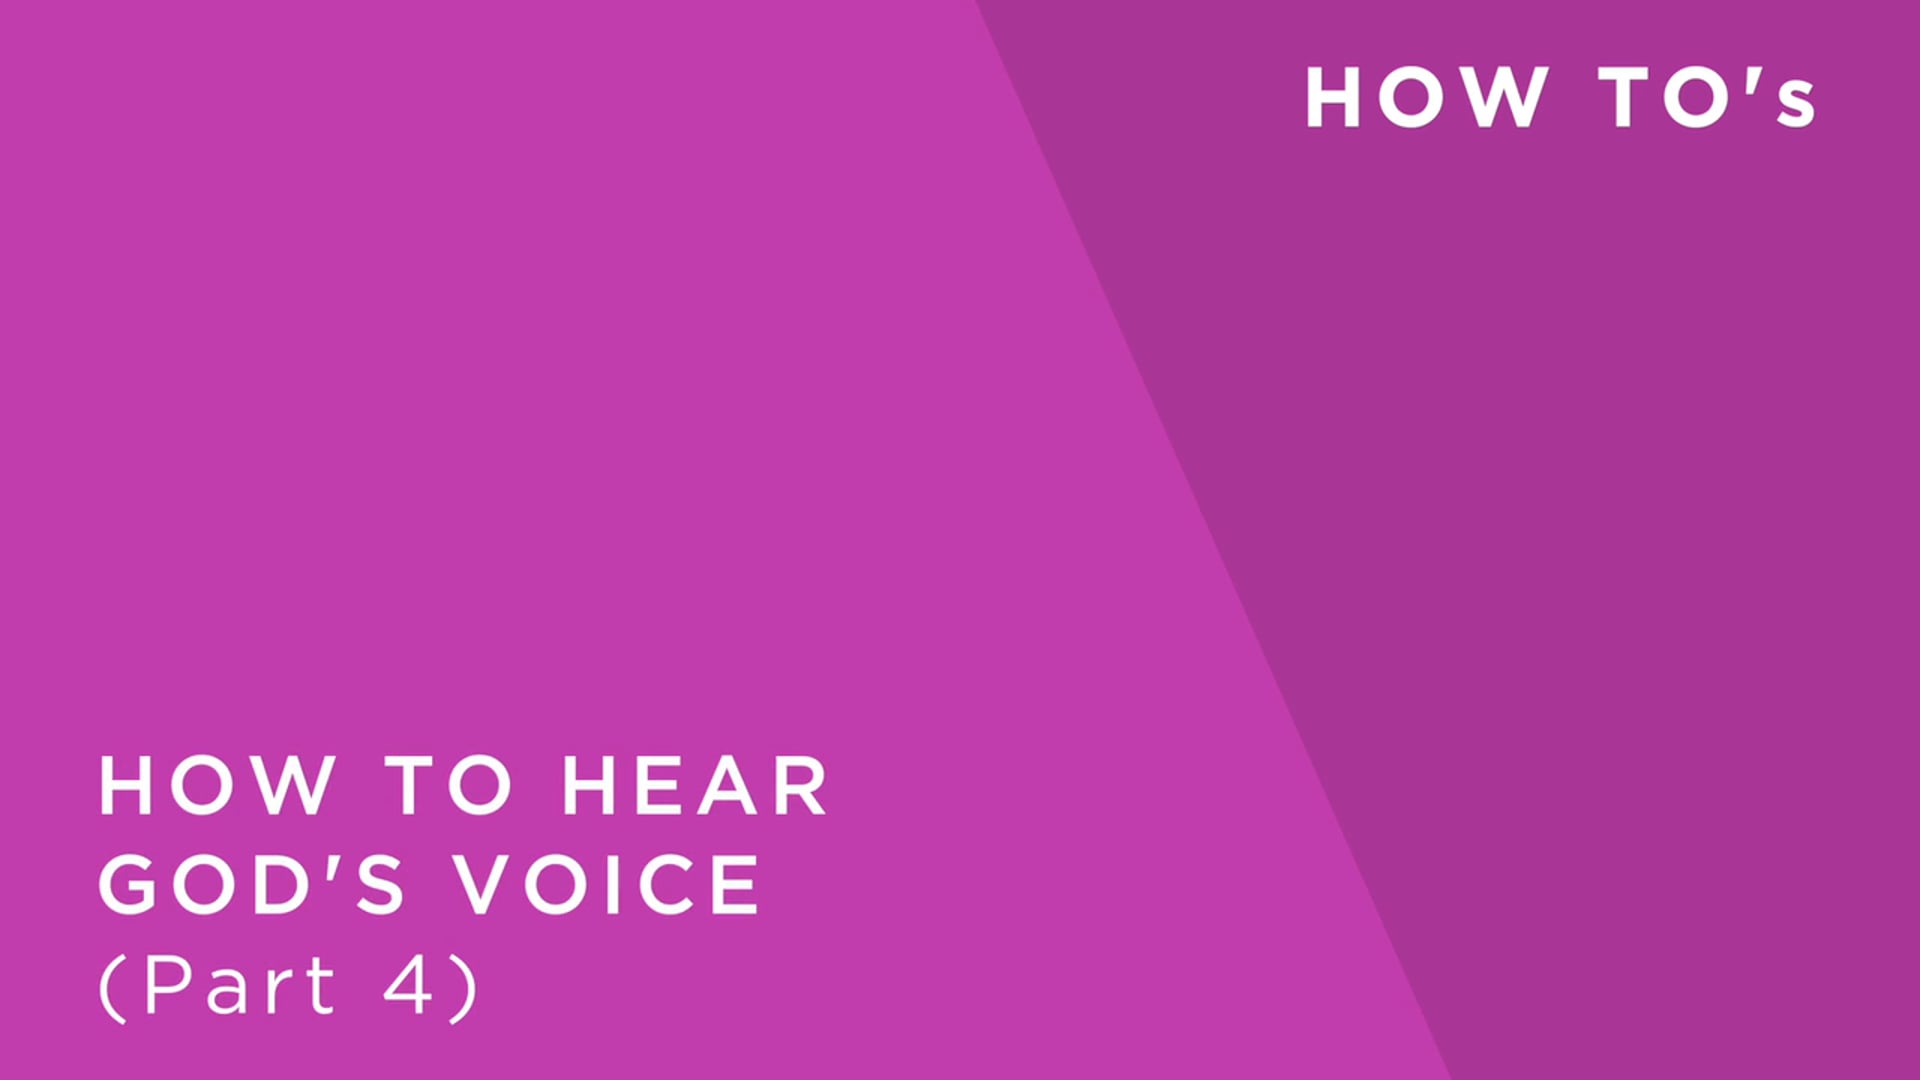 How to Hear God's Voice Part 4